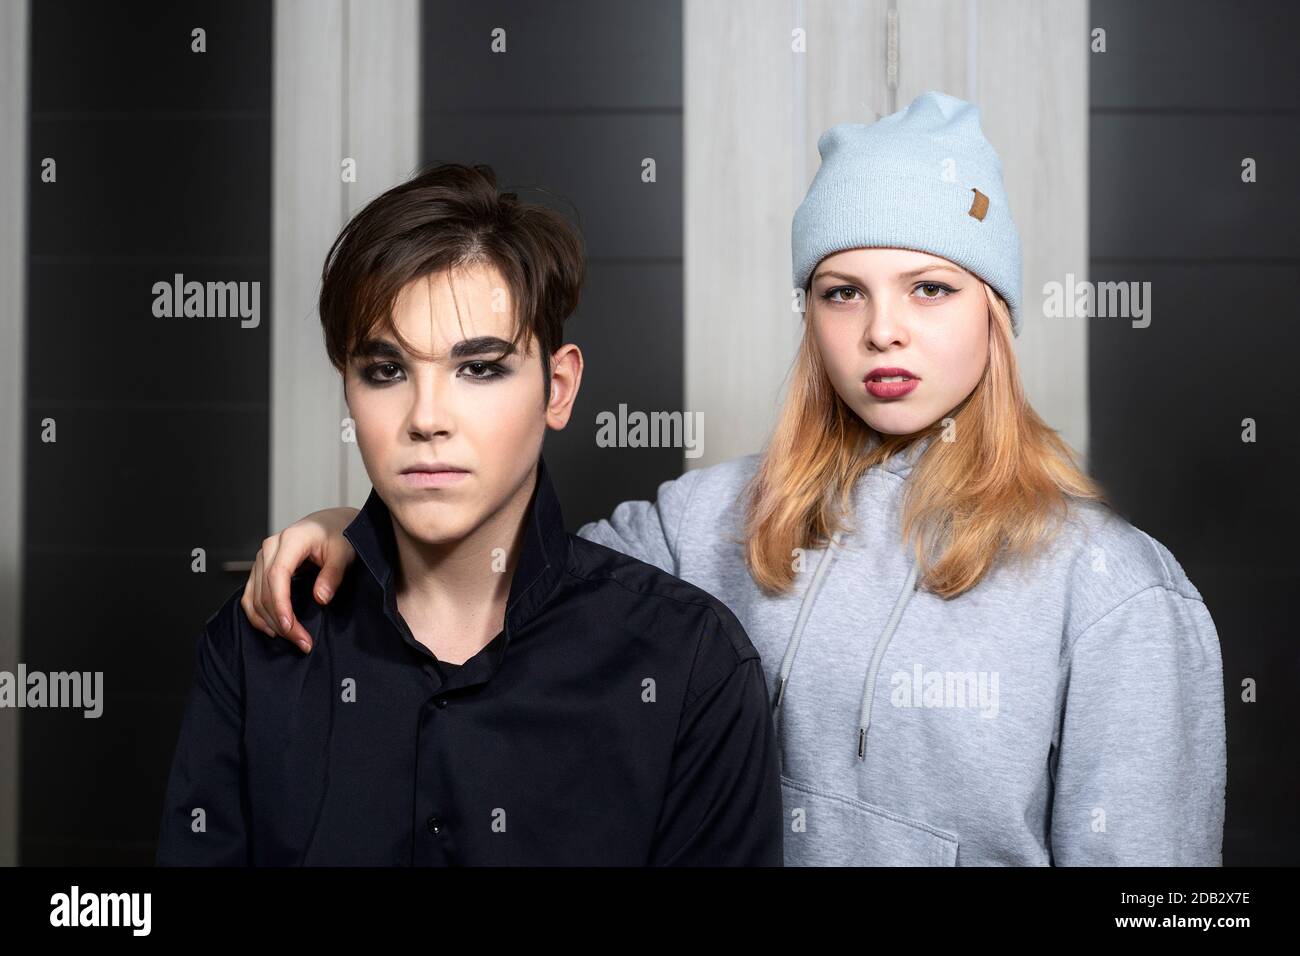 teenage boy and girl in gothic look Stock Photo